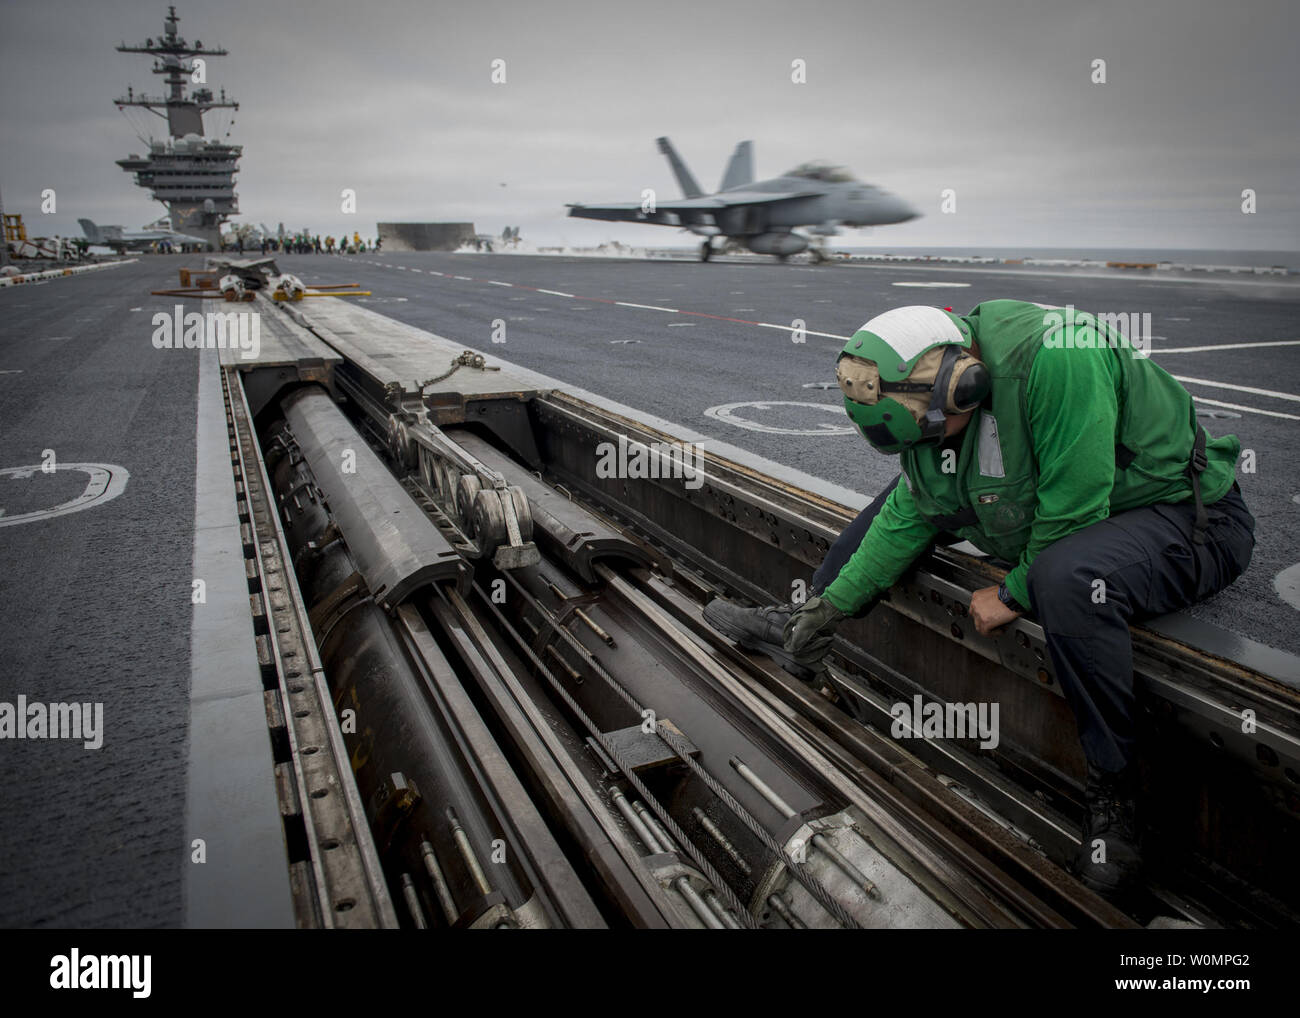 Aviation BoatswainÕs Mate (Equipment) Airman Zach Walker performs maintenance on a catapult on the flight deck of the aircraft carrier USS Carl Vinson (CVN 70) on June 7, 2016. The ship is underway conducting command assessment of readiness and training (CART) II off the coast of Southern California. Photo by Specialist 3rd Class Sean Castellano/U.S. Navy/UPI Stock Photo